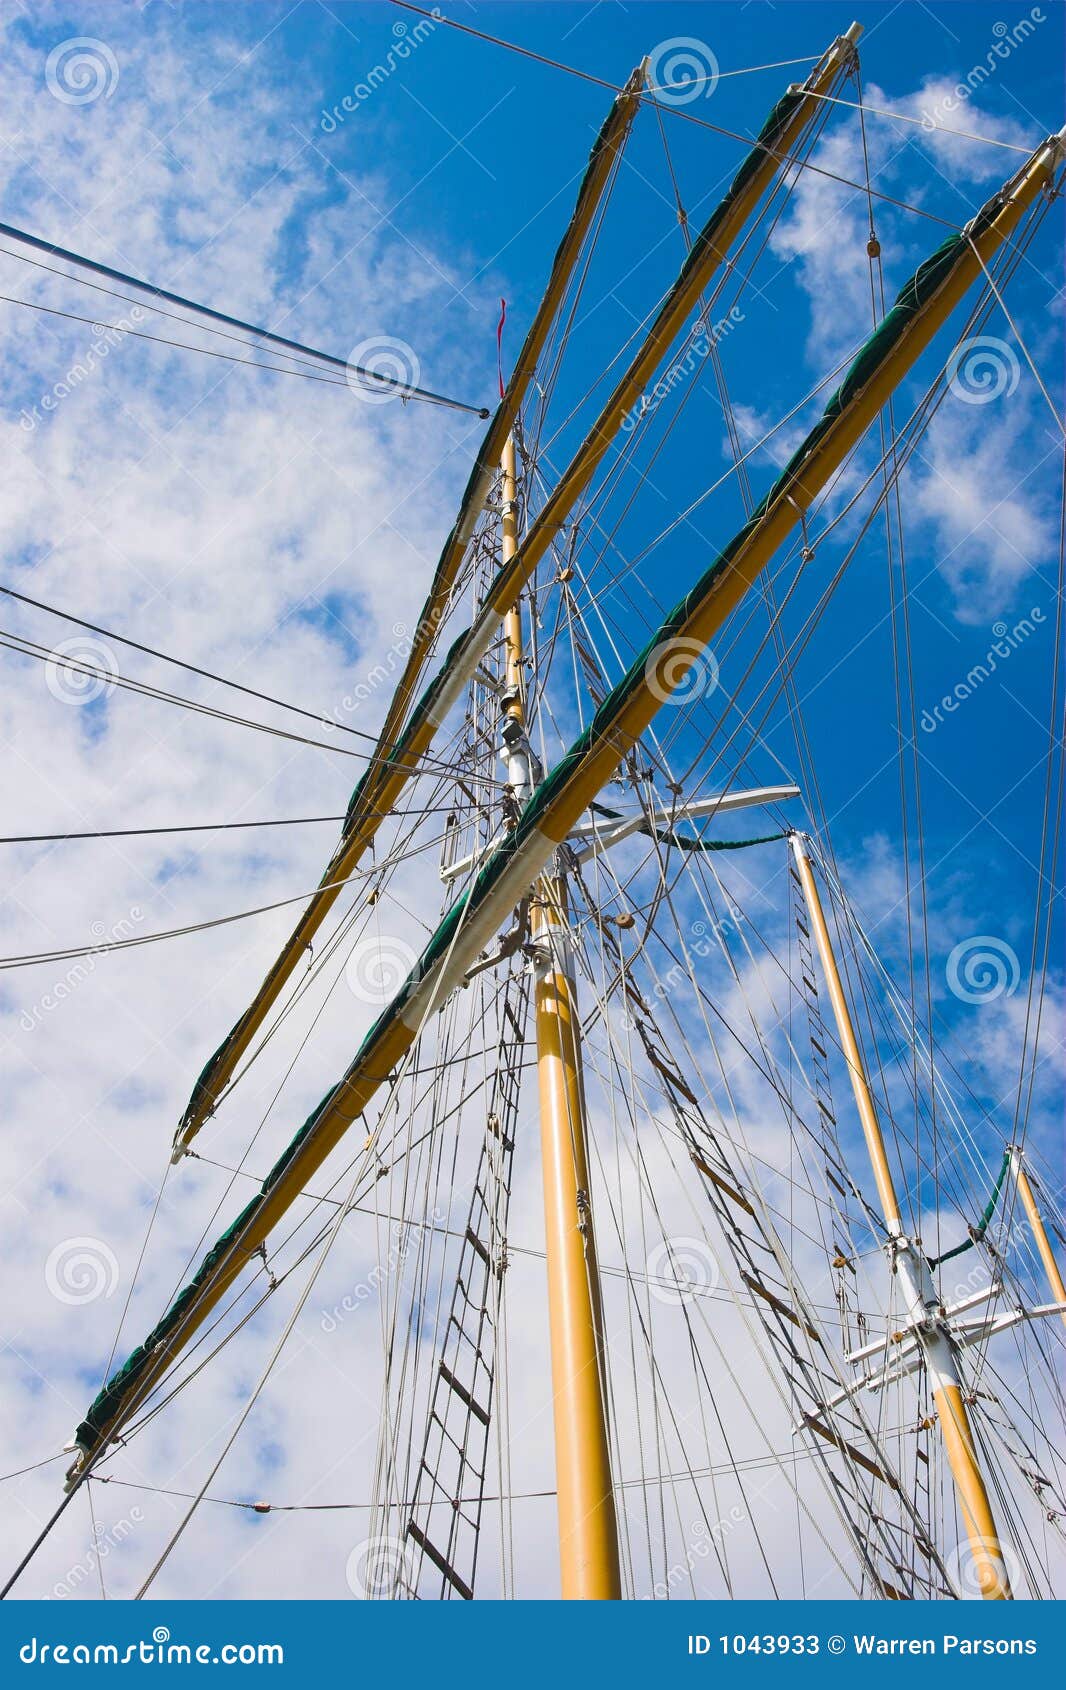 masts against blue sky